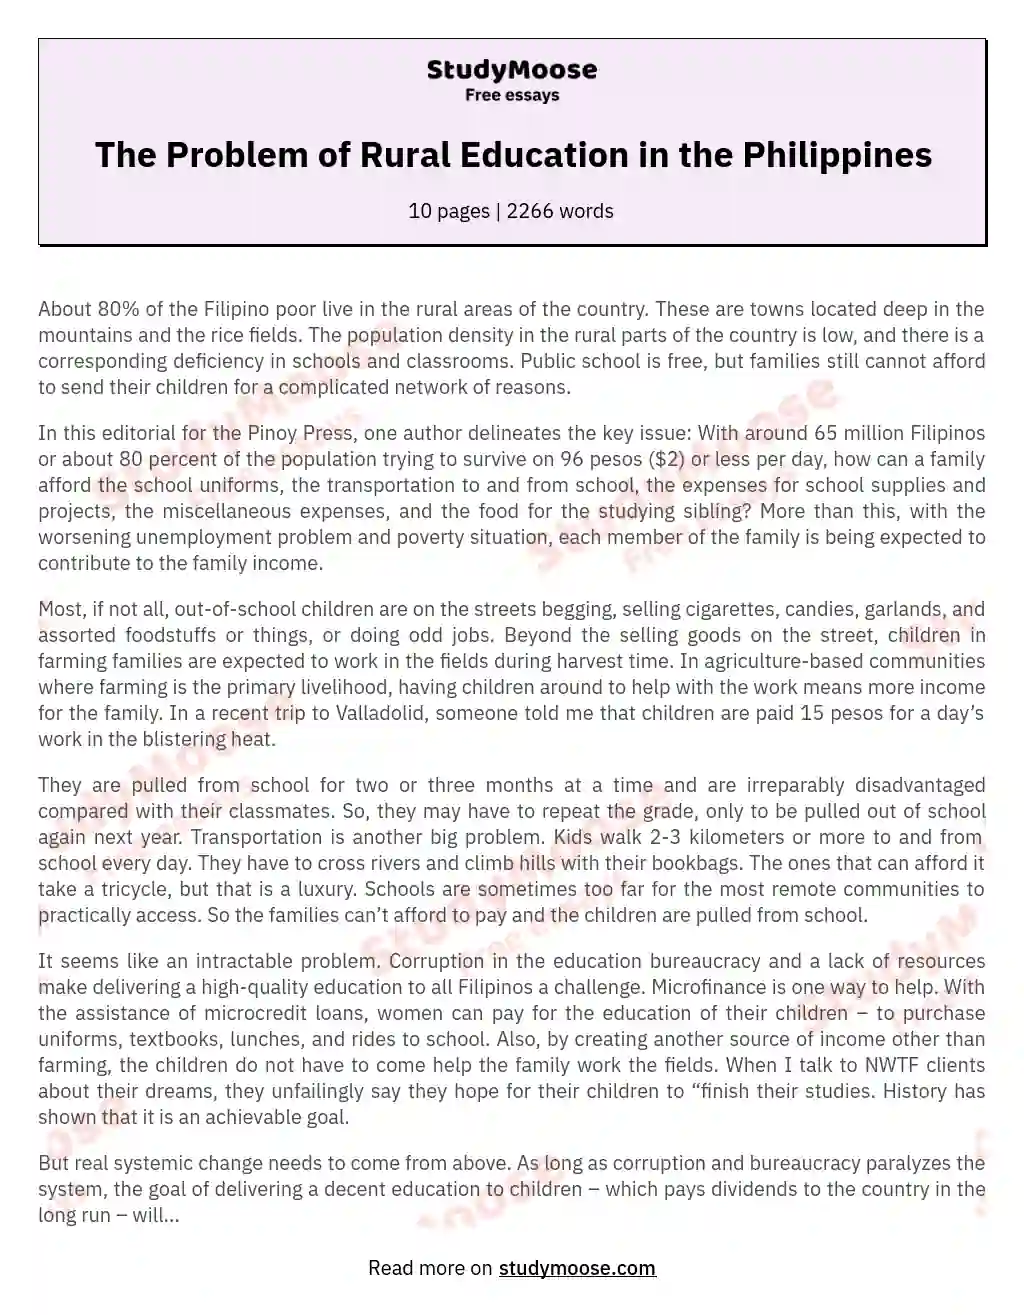 The Problem of Rural Education in the Philippines essay